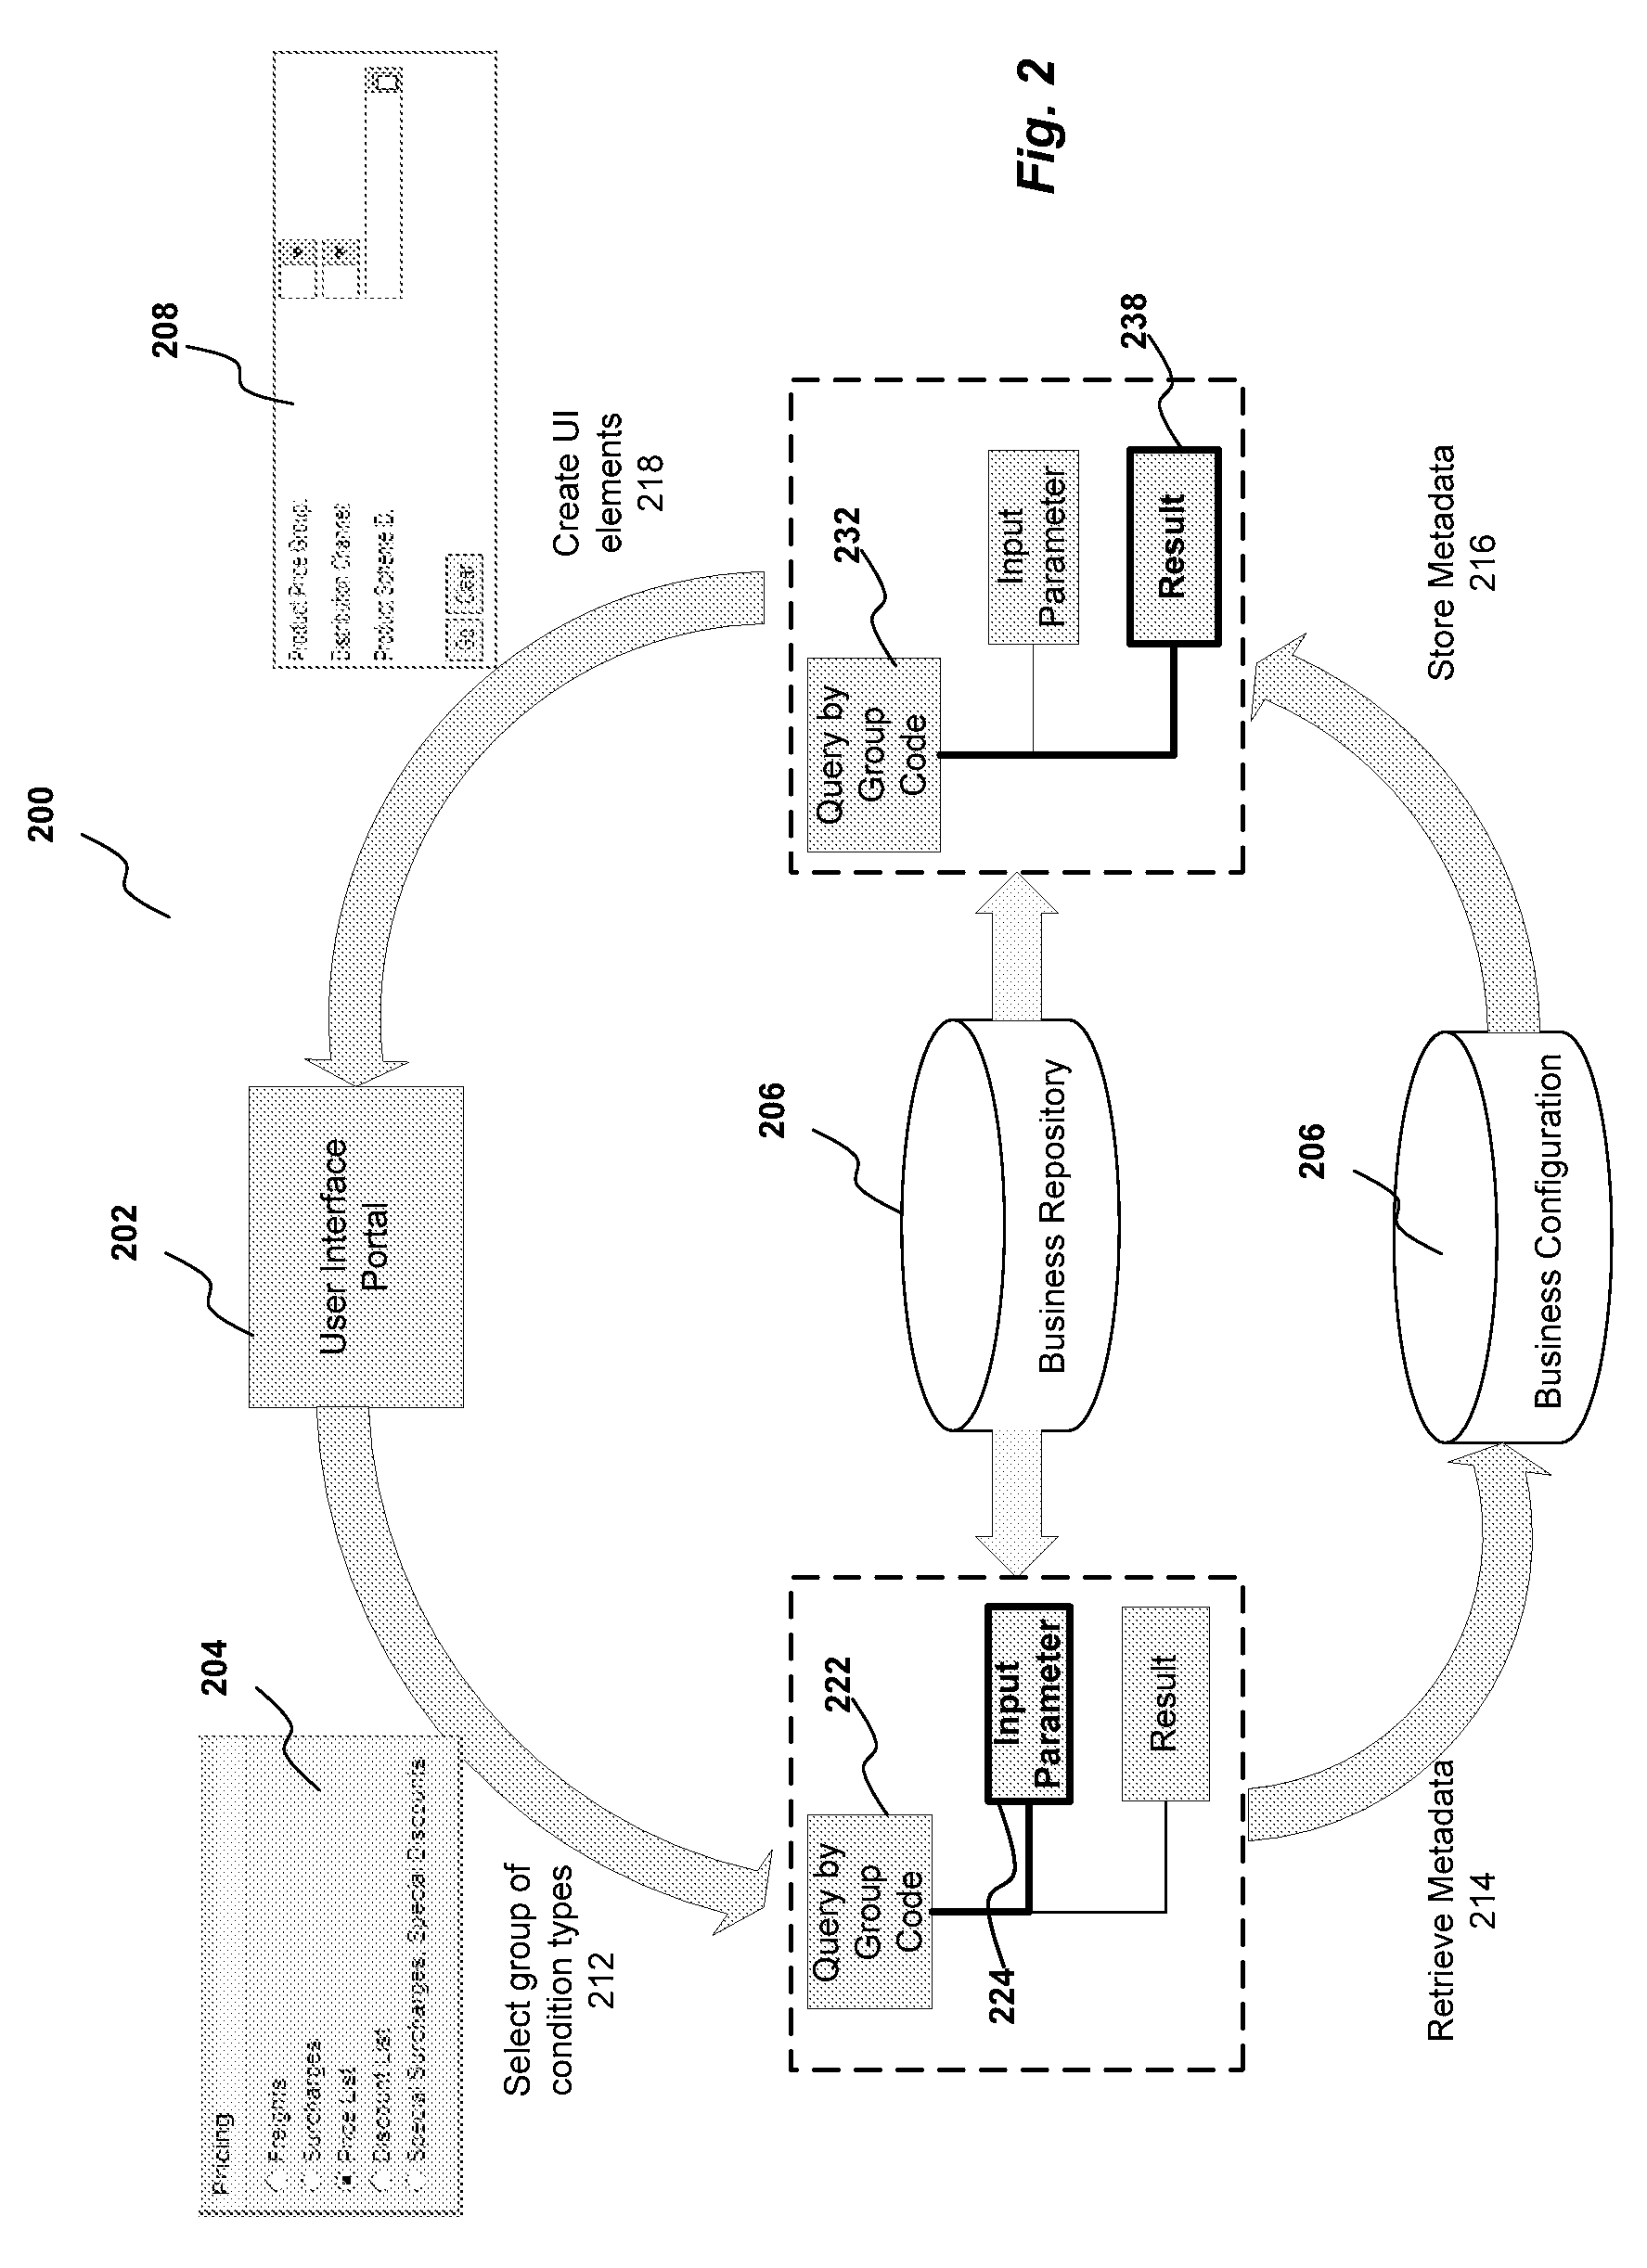 Method and system for querying a database